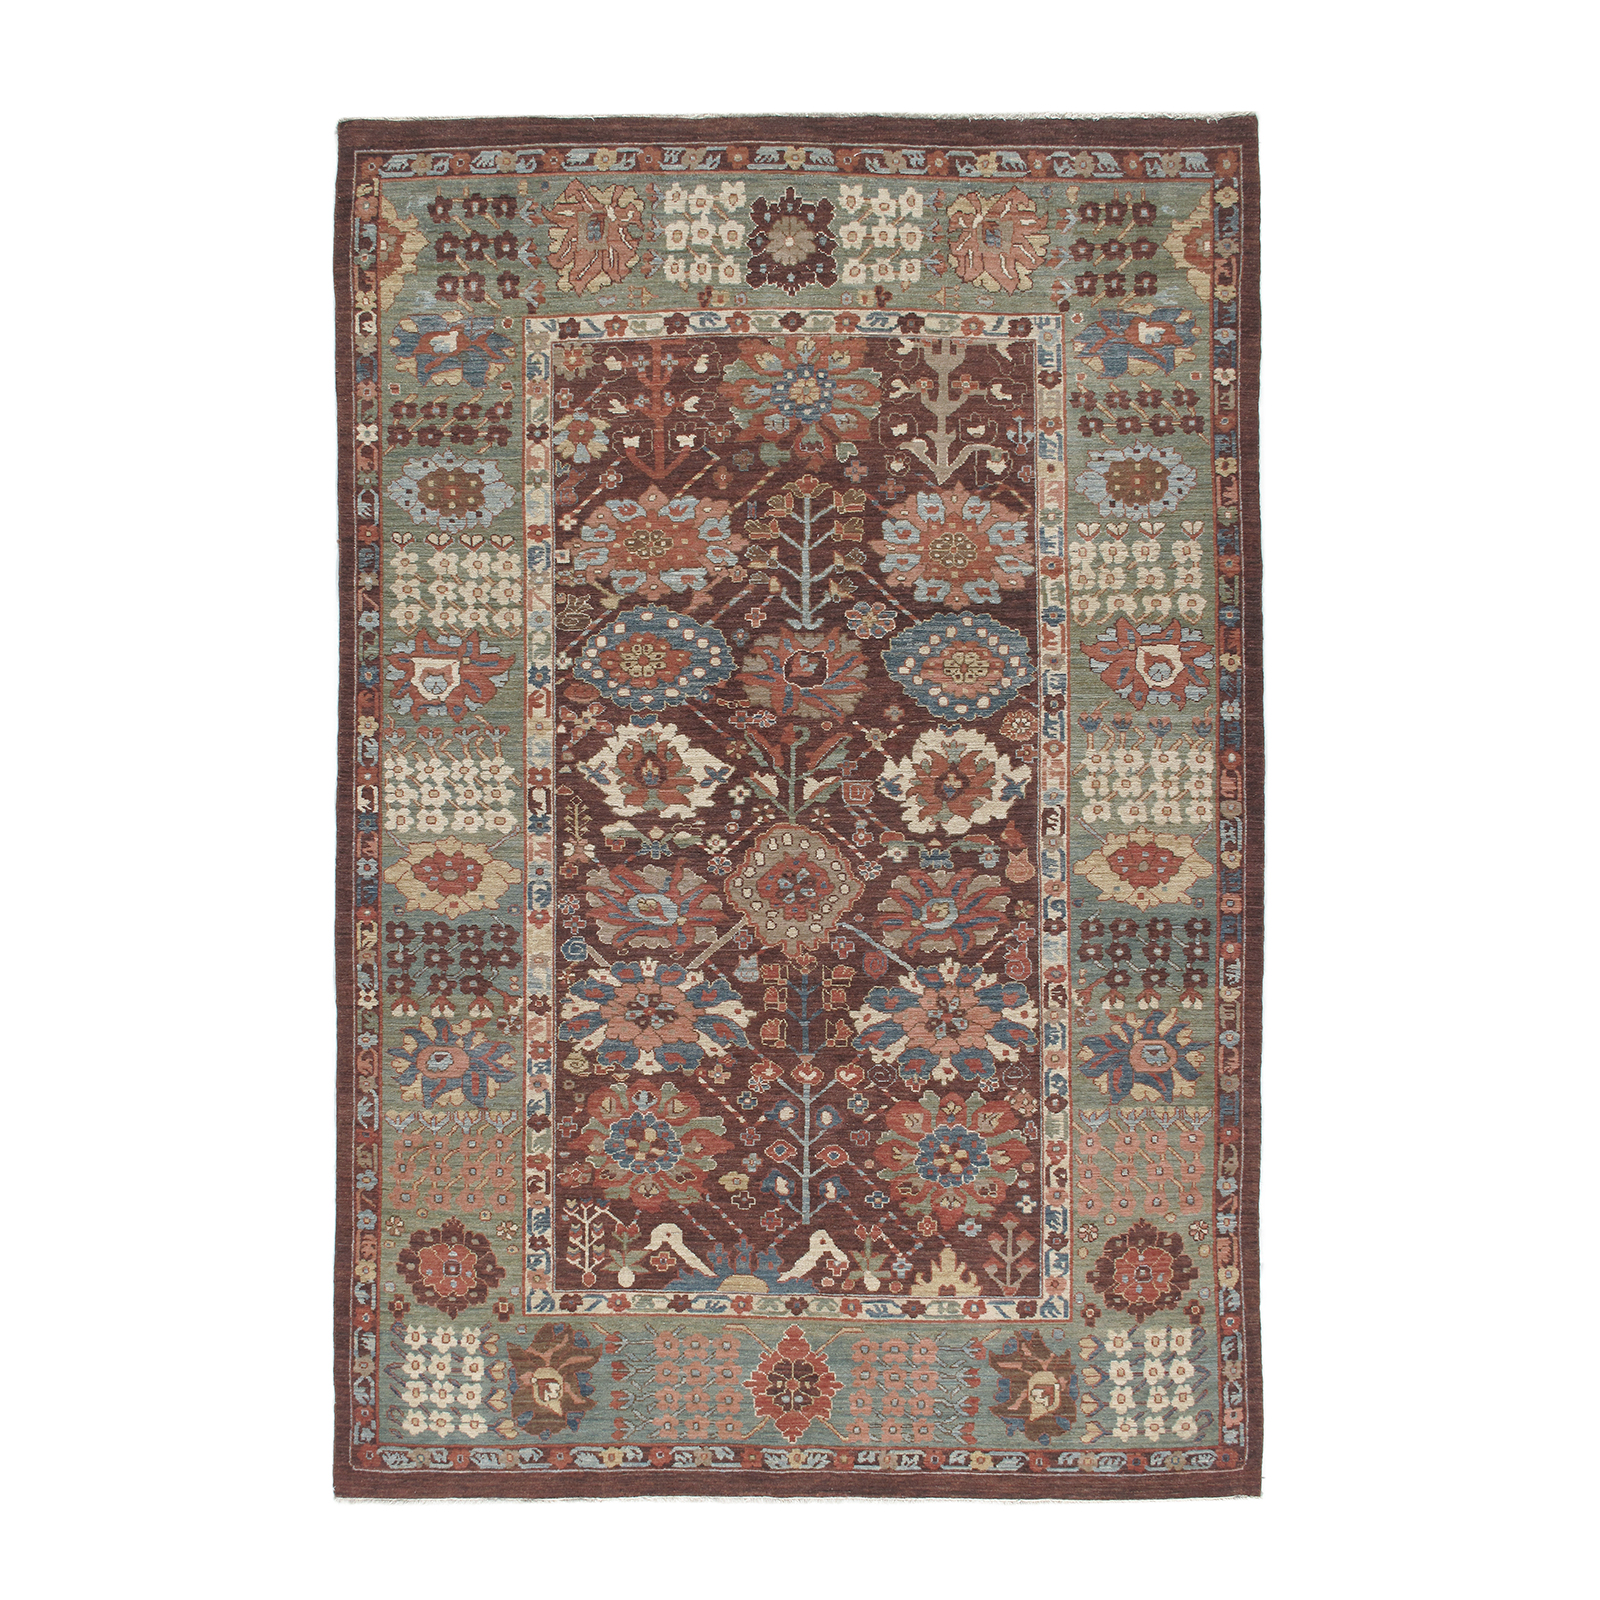 This Persian Kurdish rug resembles the rare and collectible antique Kurdish rugs that were produced in the 19th century and earlier.